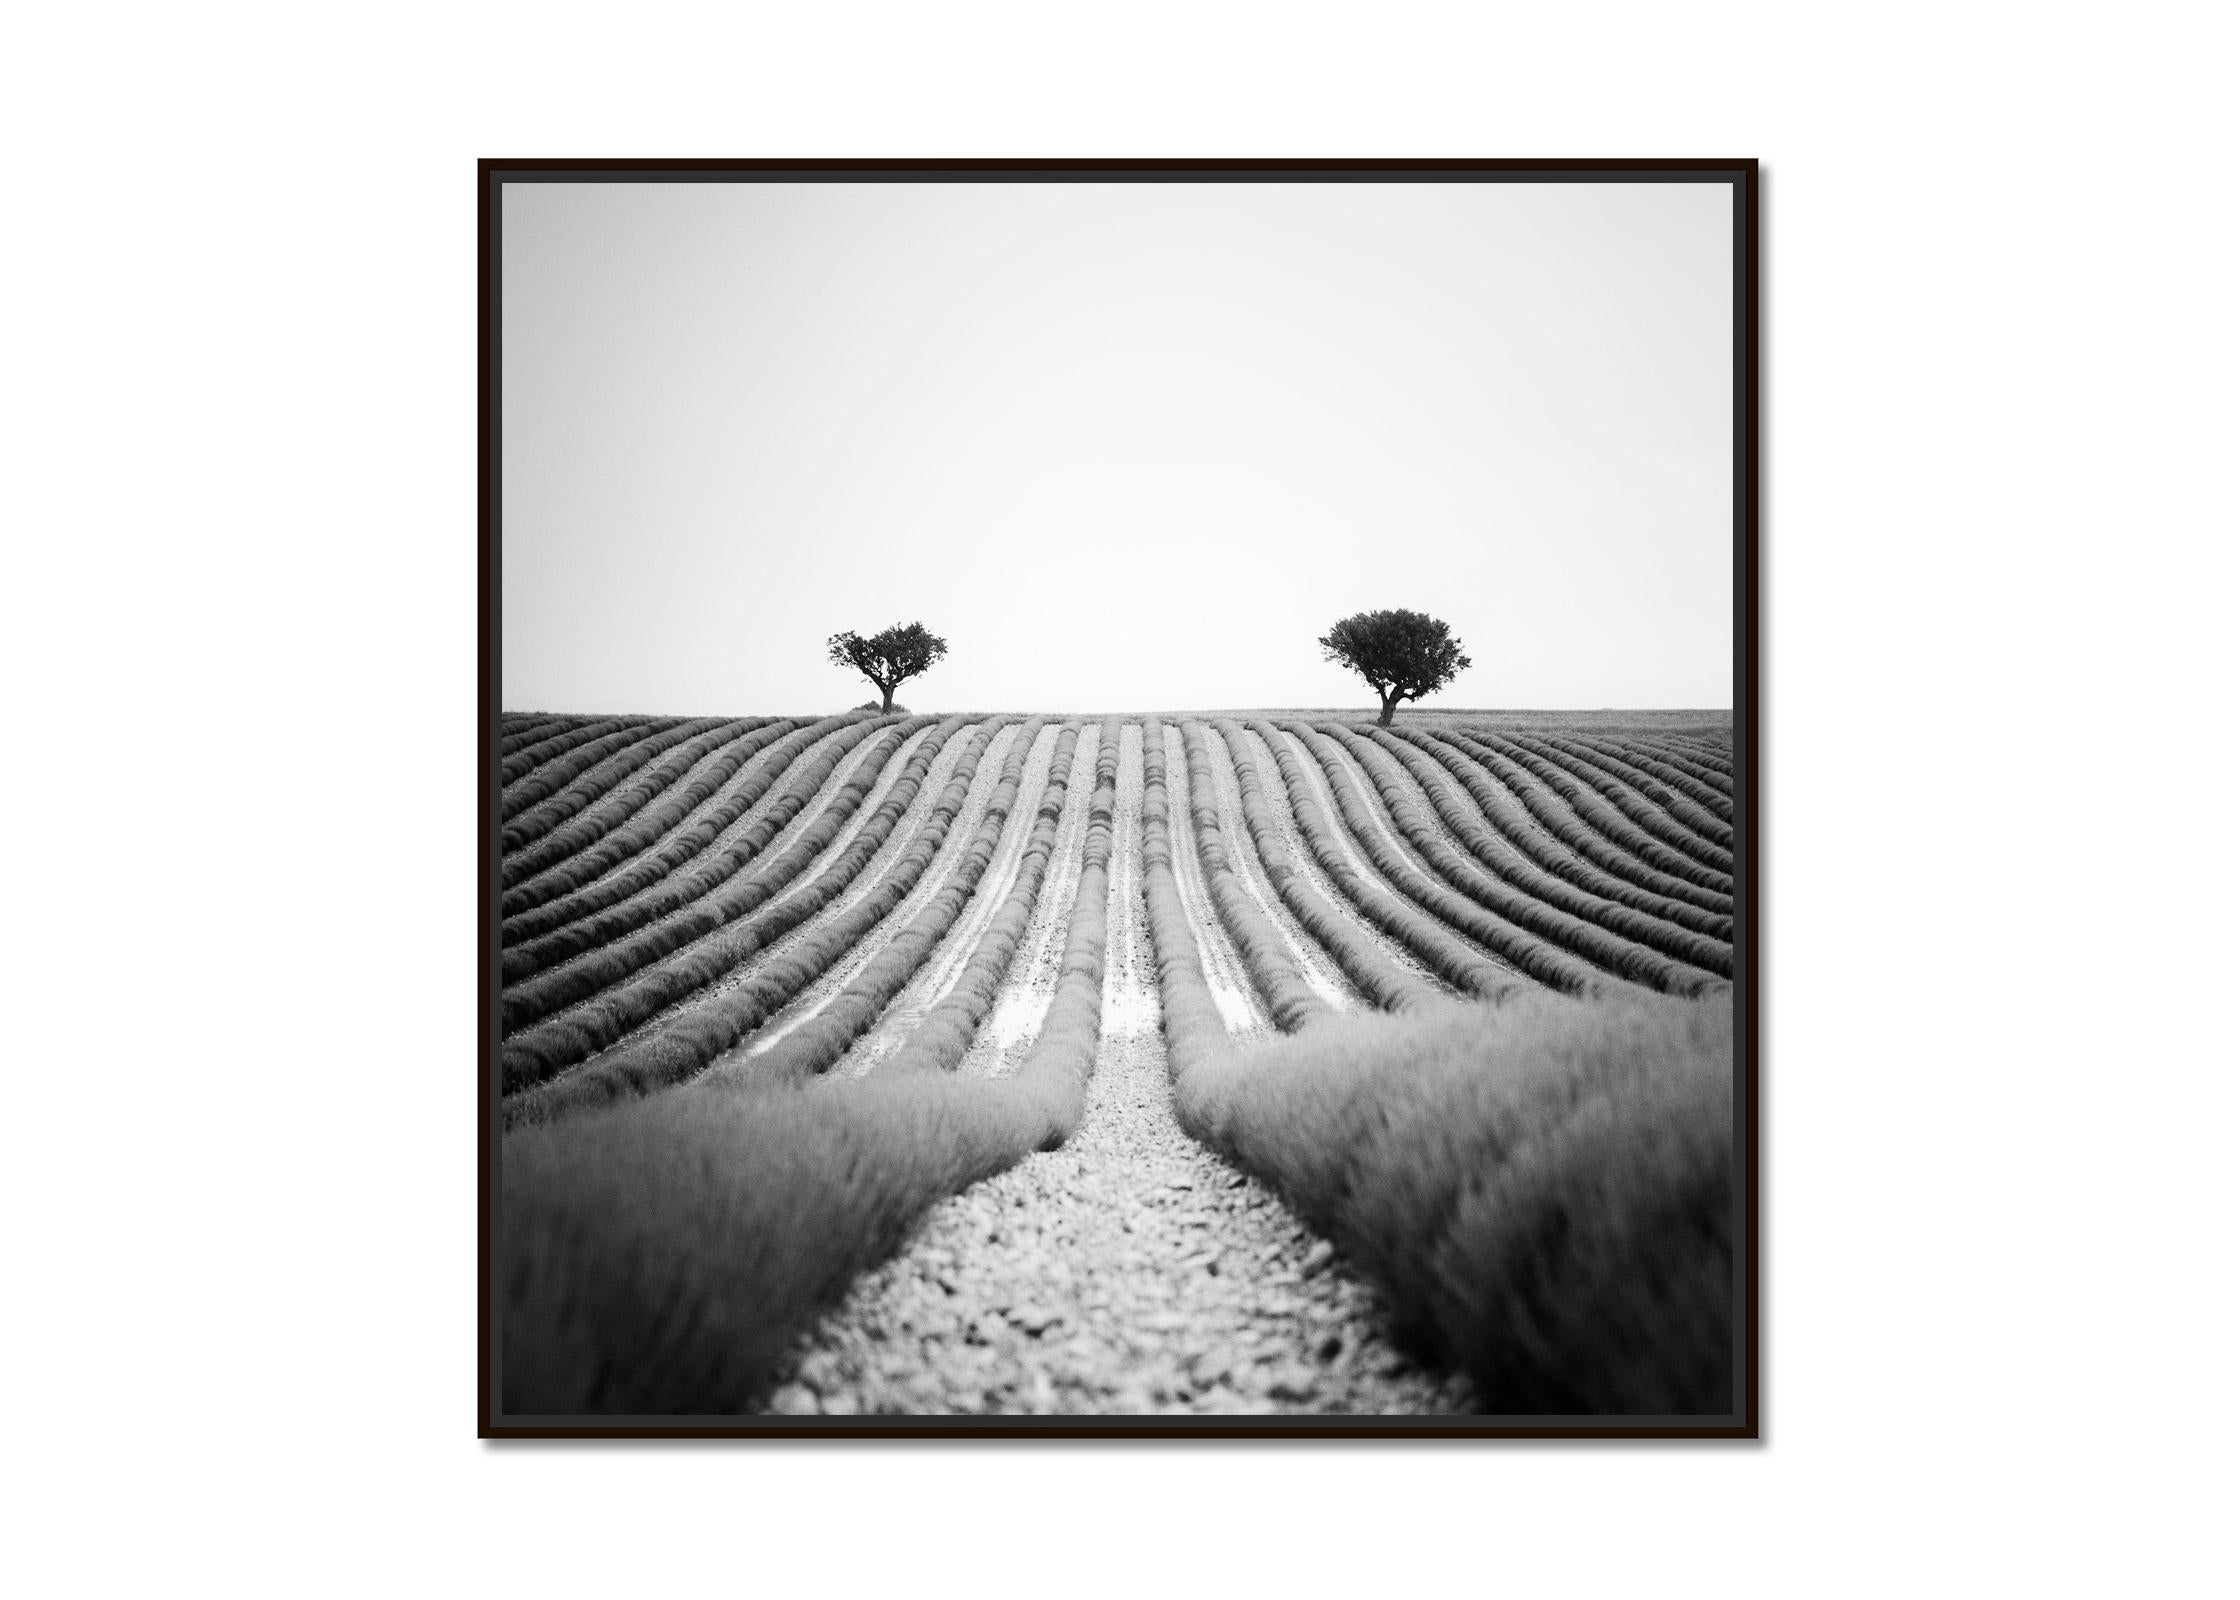 Lavender Field, Trees, Provence, France, black and white landscape photography - Photograph by Gerald Berghammer